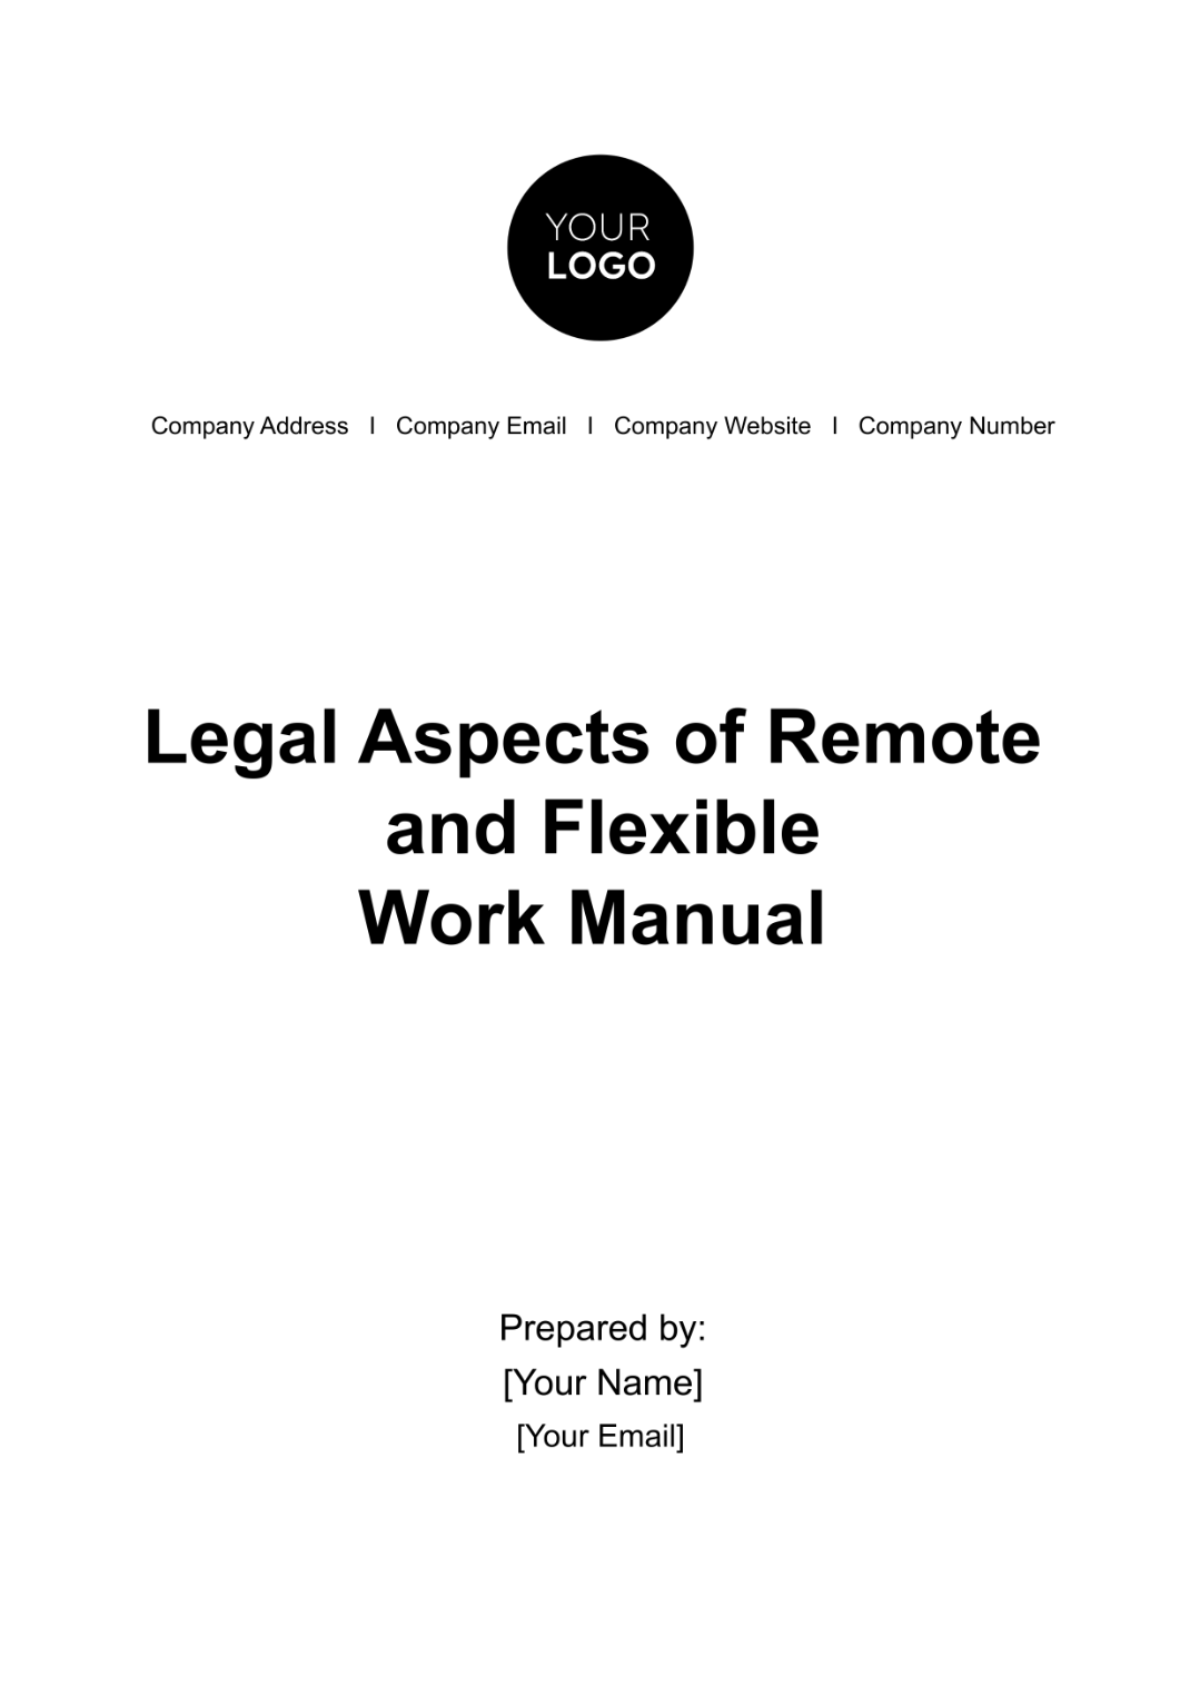 Legal Aspects of Remote and Flexible Work Manual HR Template